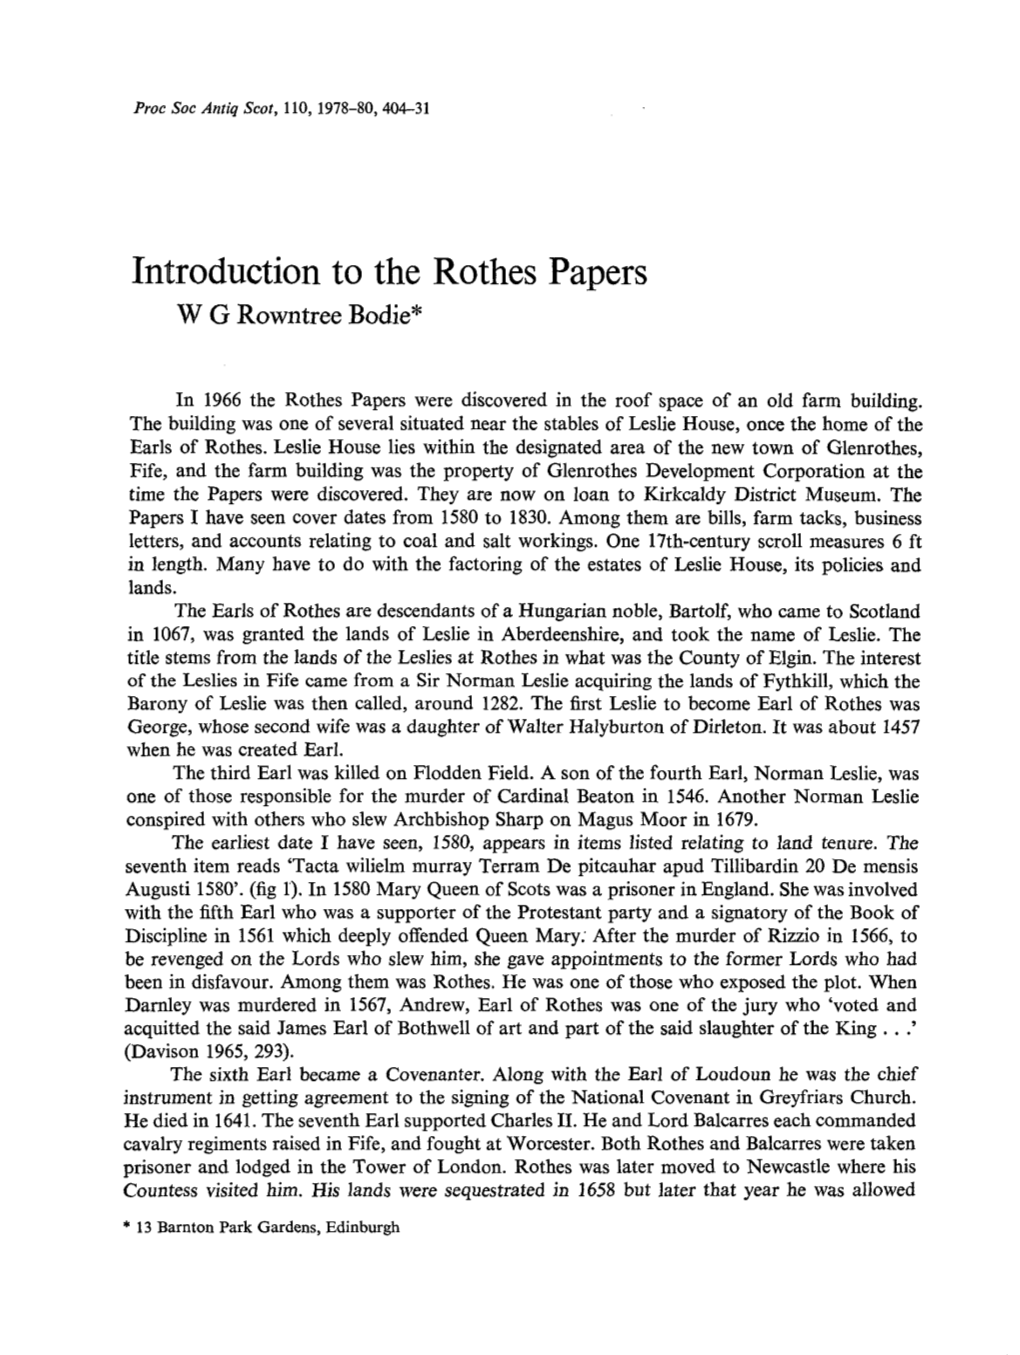 Introduction to the Rothes Papers Wrowntreg E Bodie*